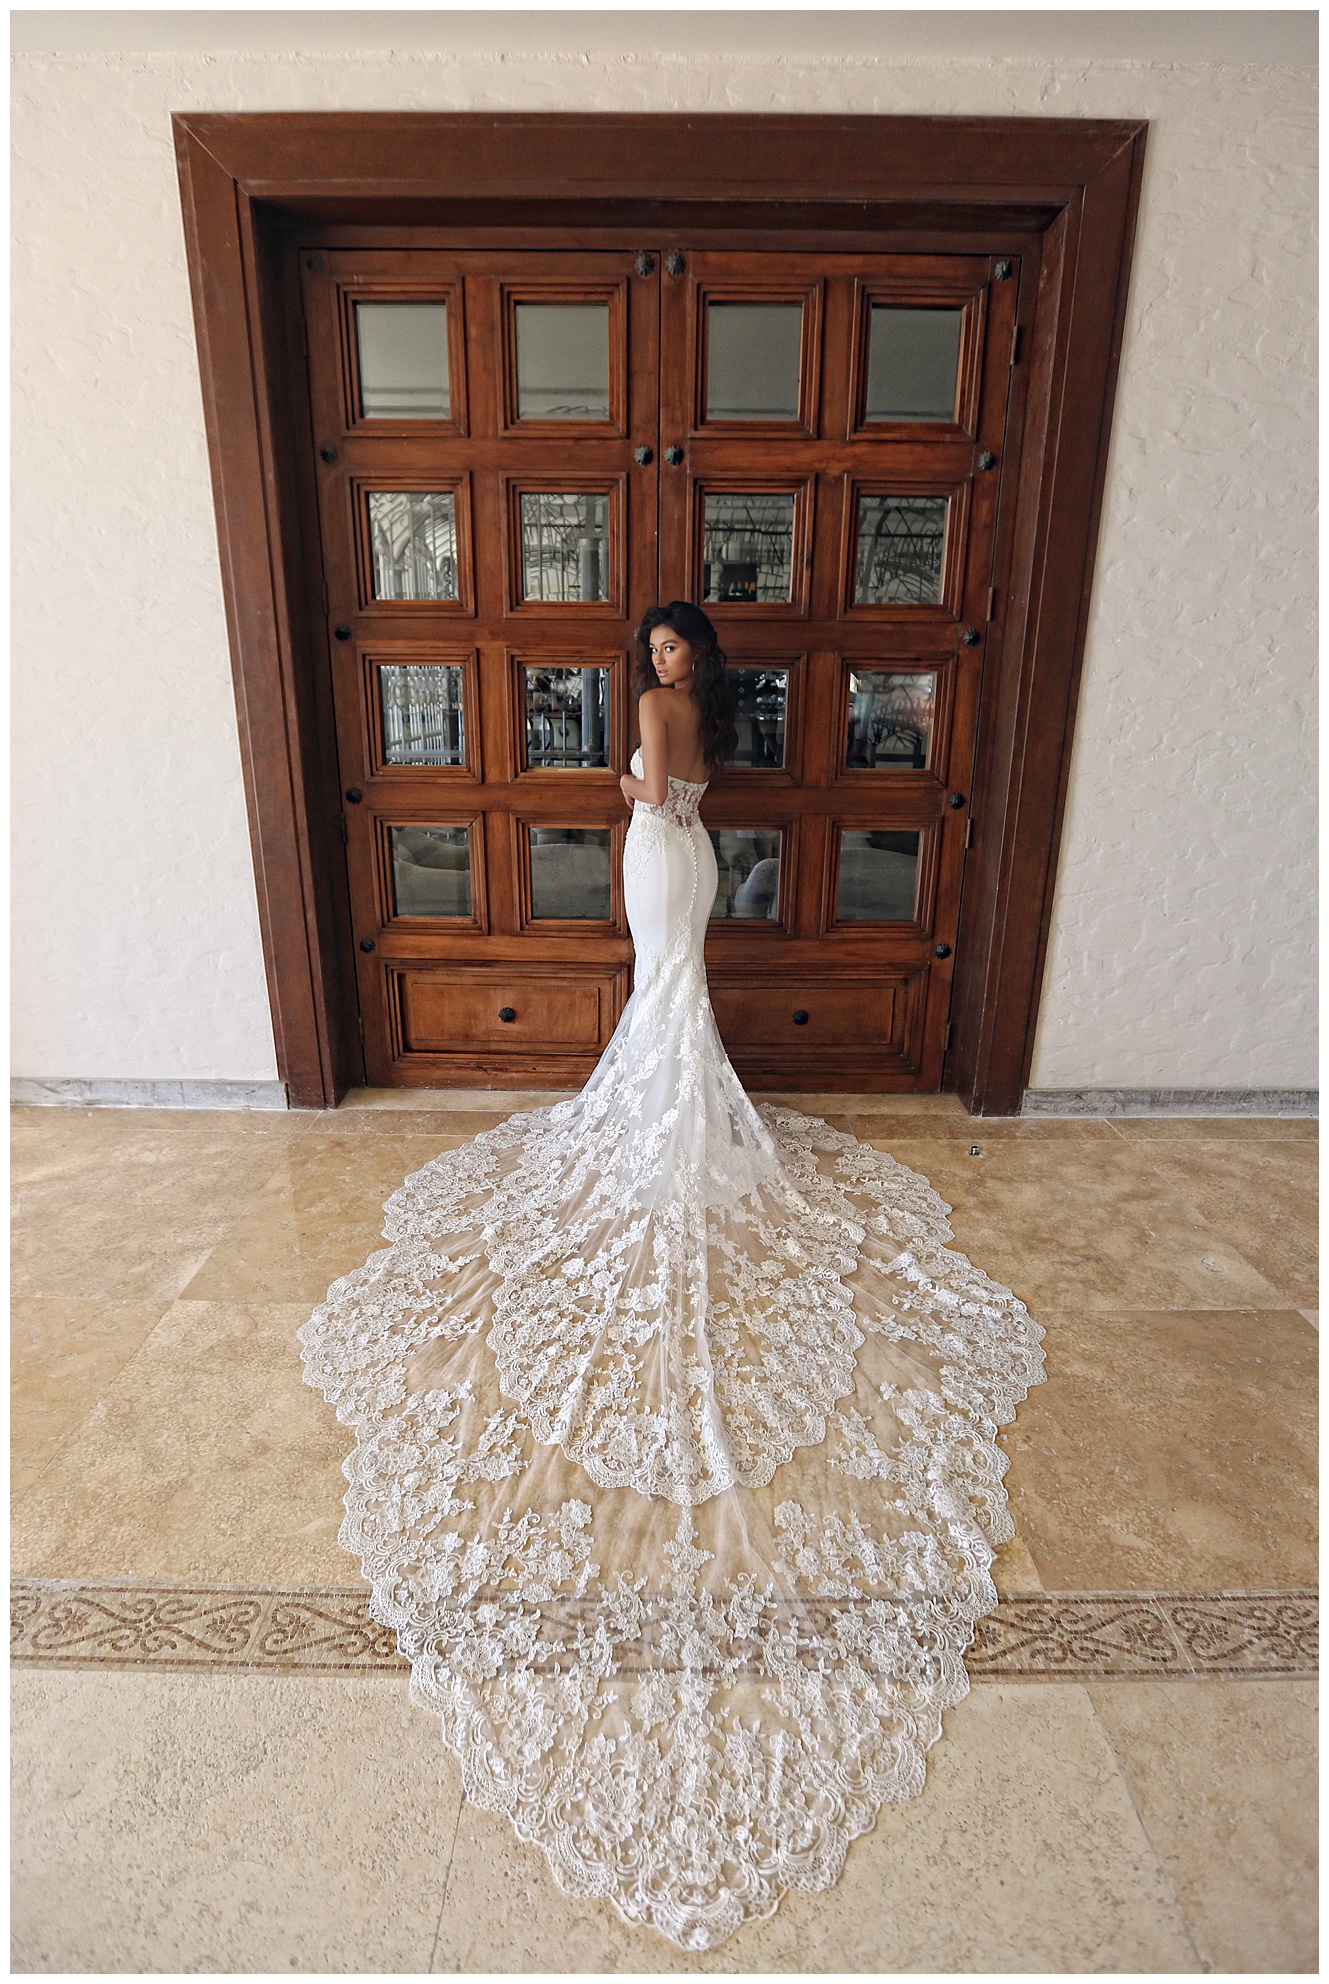 enzoani dress price online sale up to 59 off on enzoani wedding dress cost